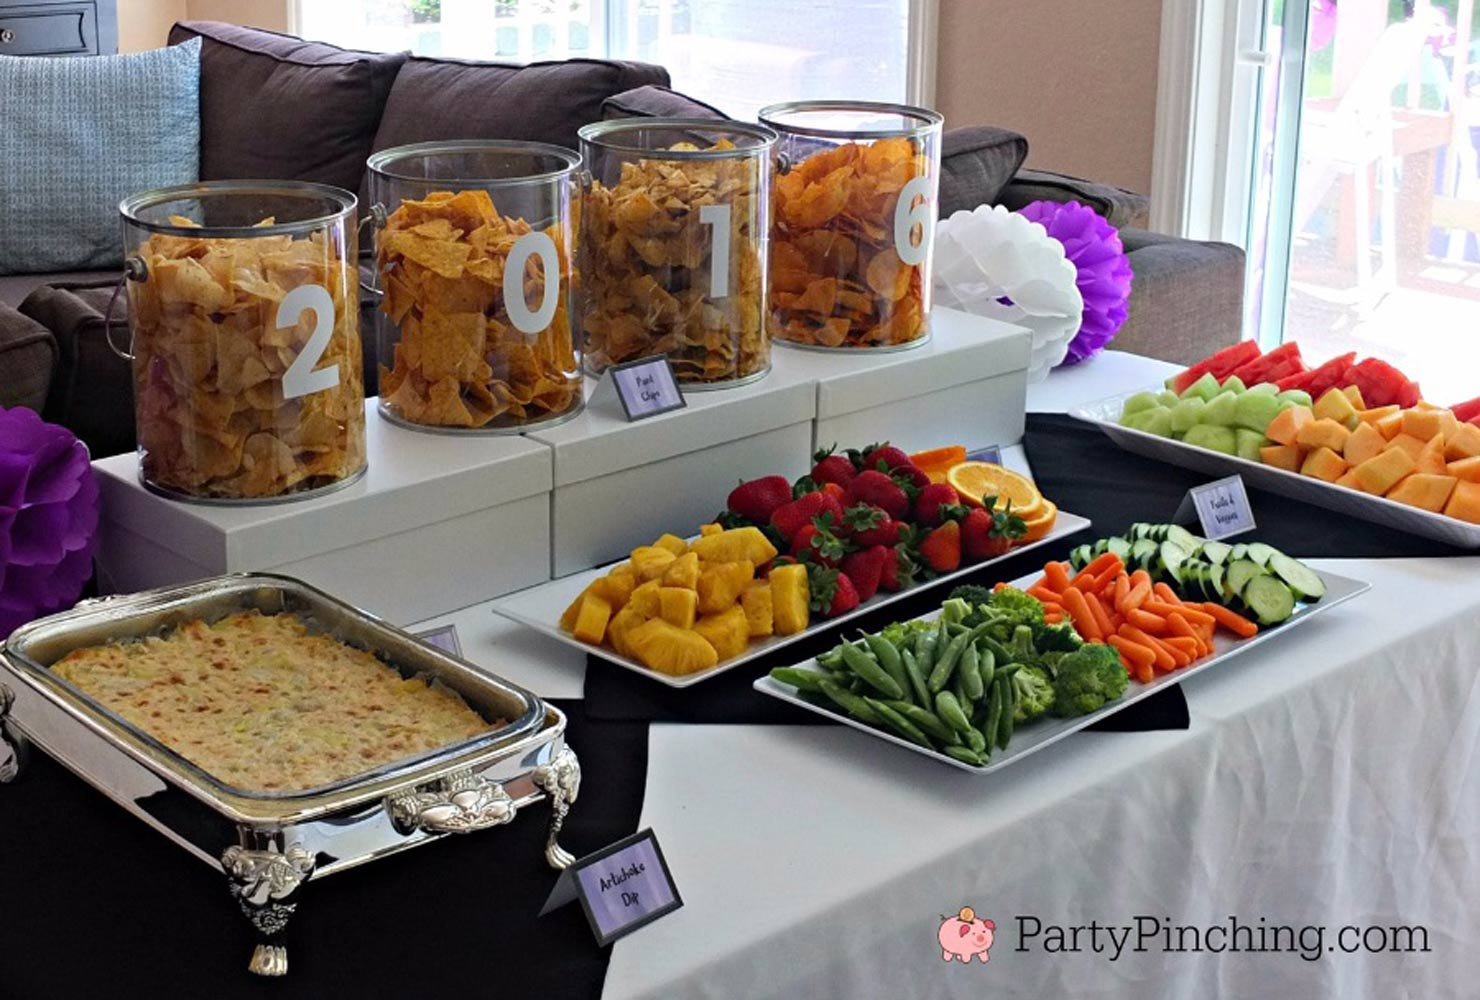 Graduation Party Food Ideas On A Budget
 90 Graduation Party Ideas for High School & College 2019